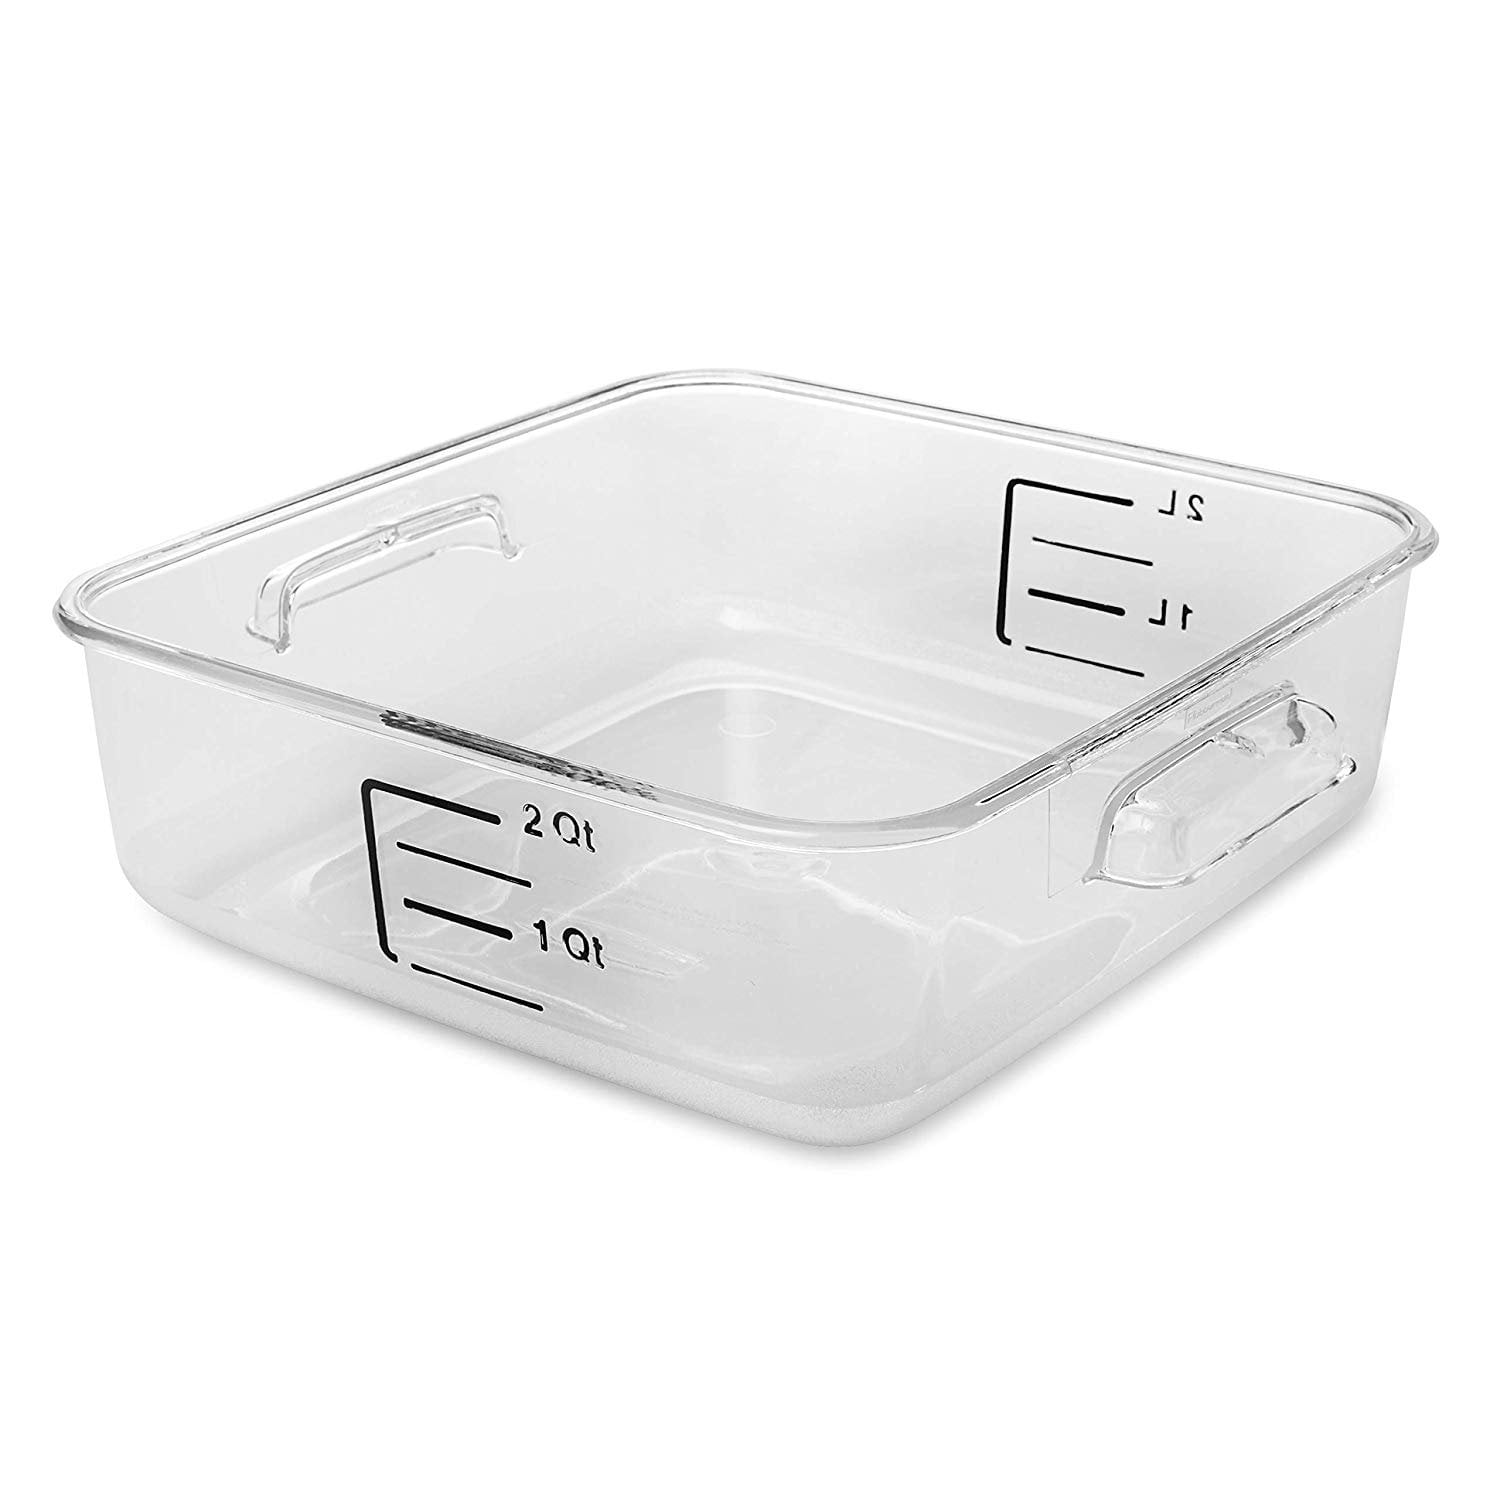 Rubbermaid 1951293 2 Cup Clear Square Premier Storage Container